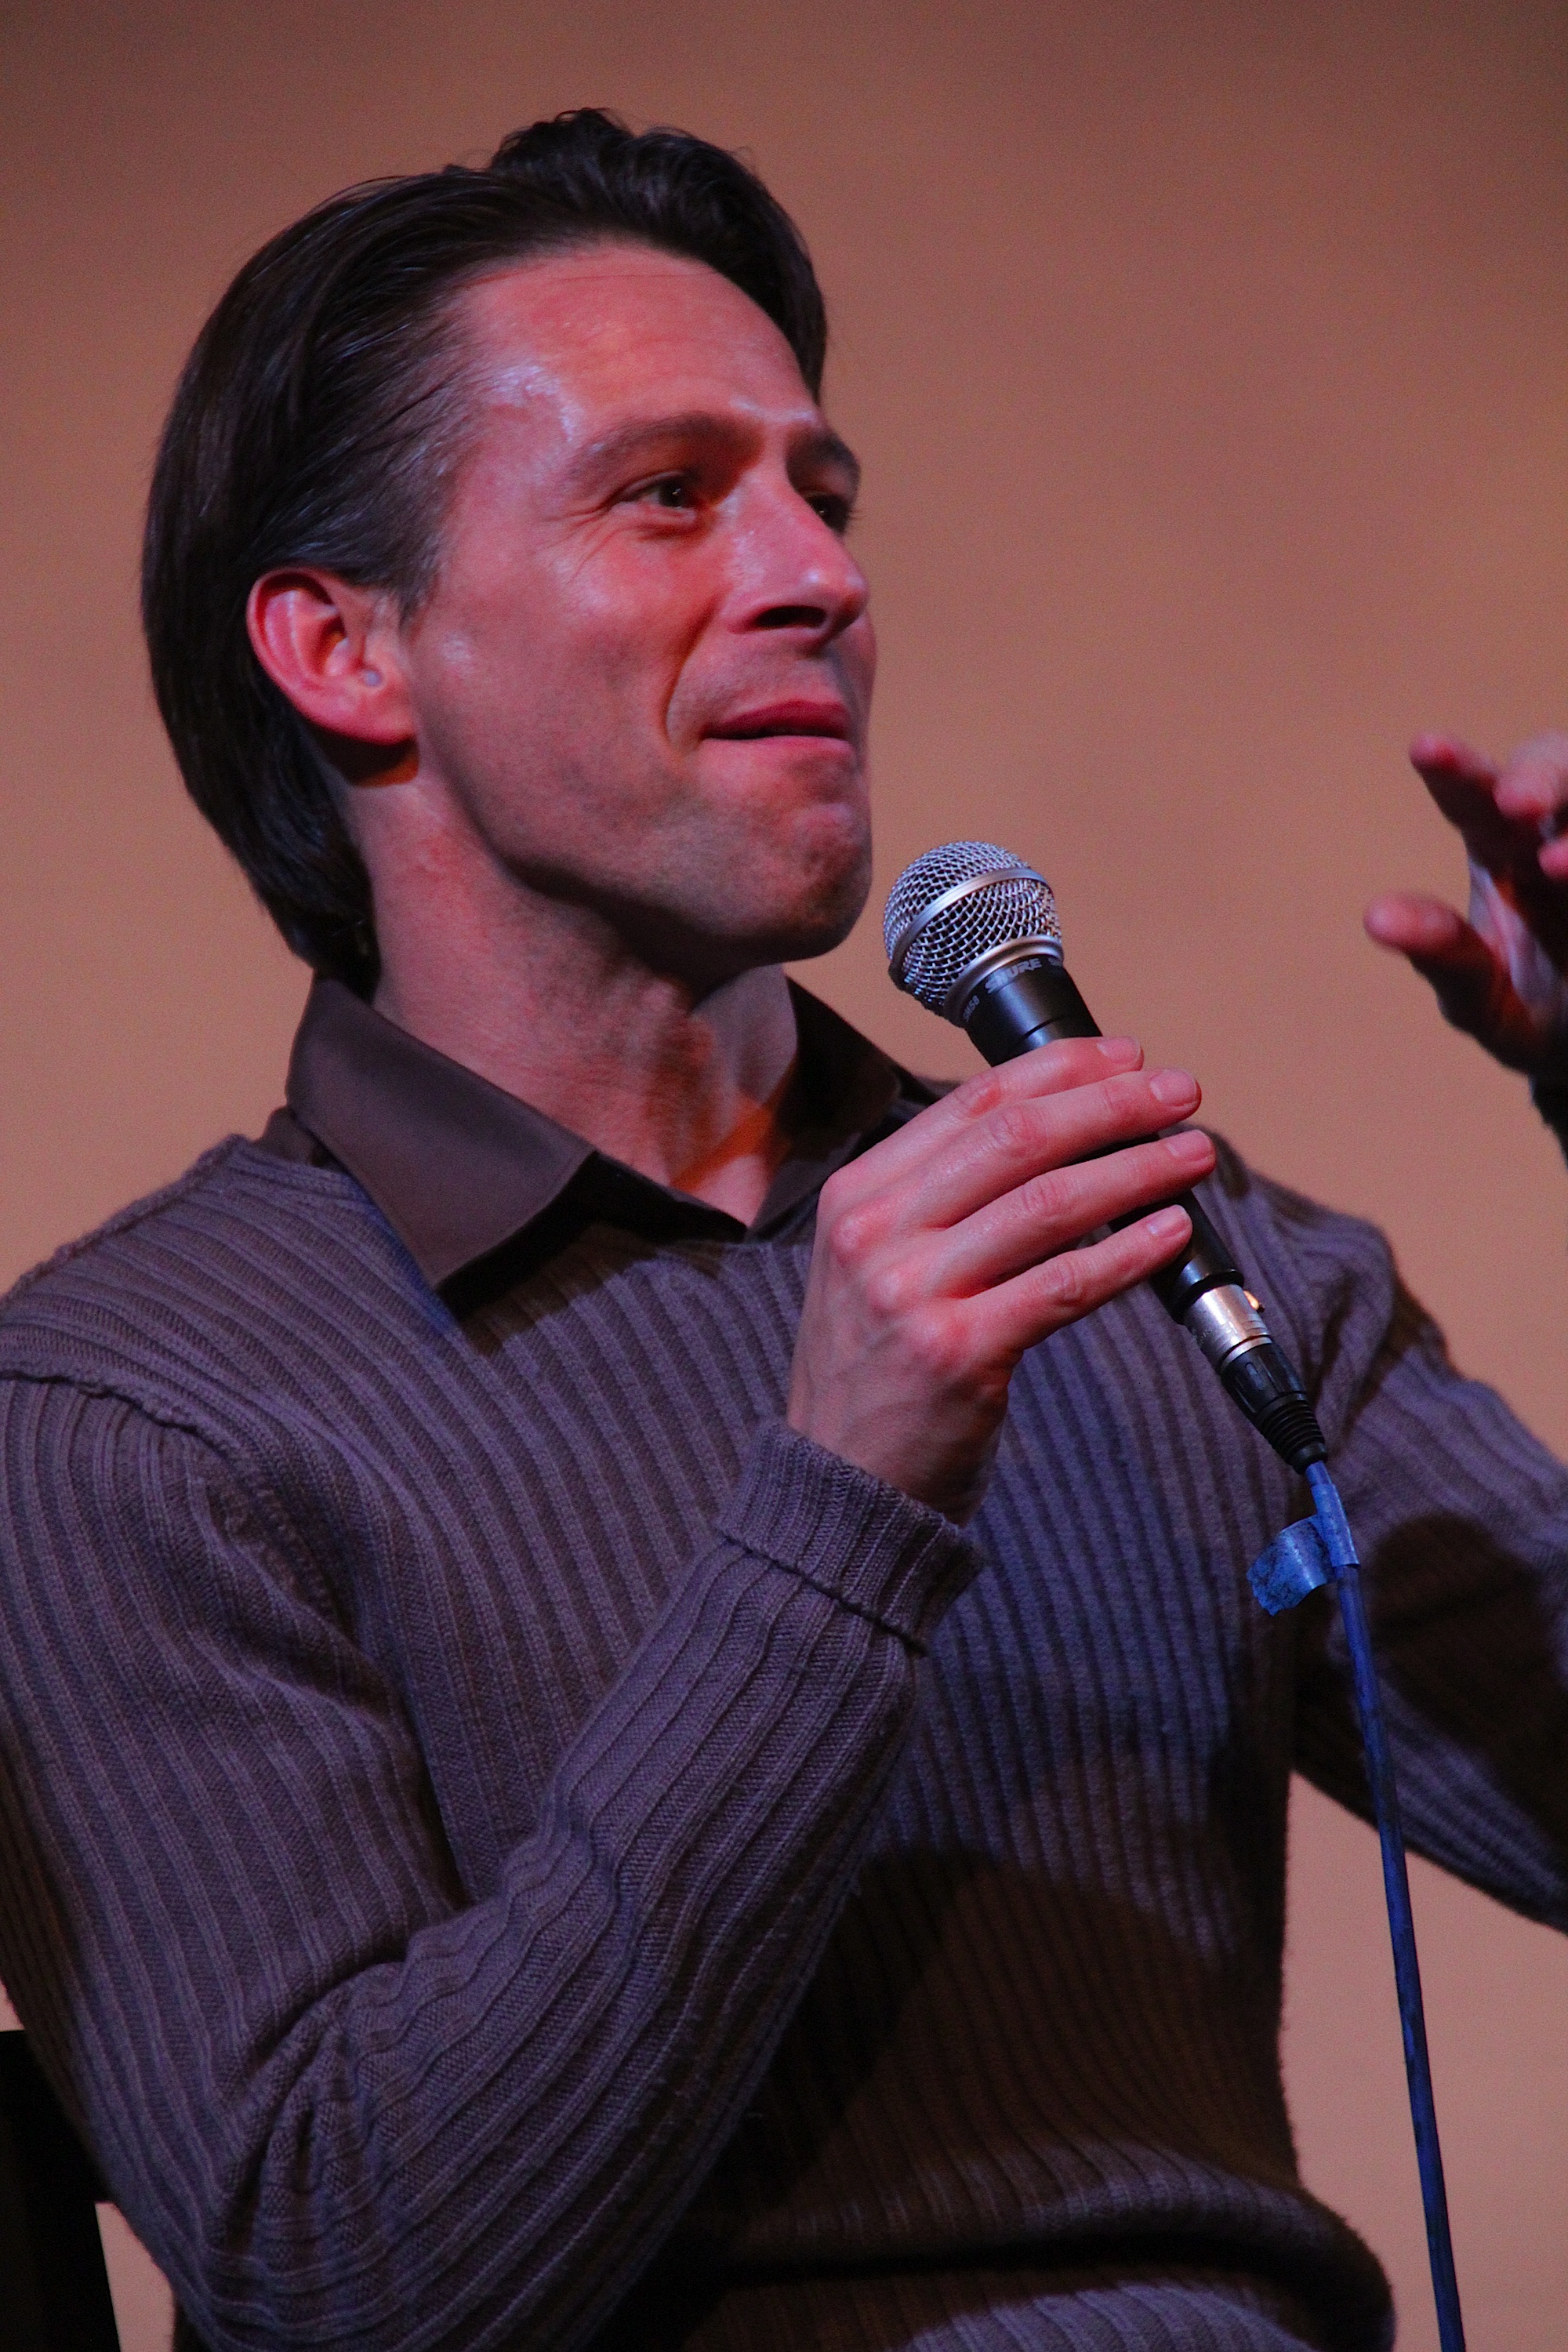 Jonathan Glendening at the GRIMM UP NORTH HORROR FILM FESTIVAL Q&A screening of NIGHTWOLF (13HRS)